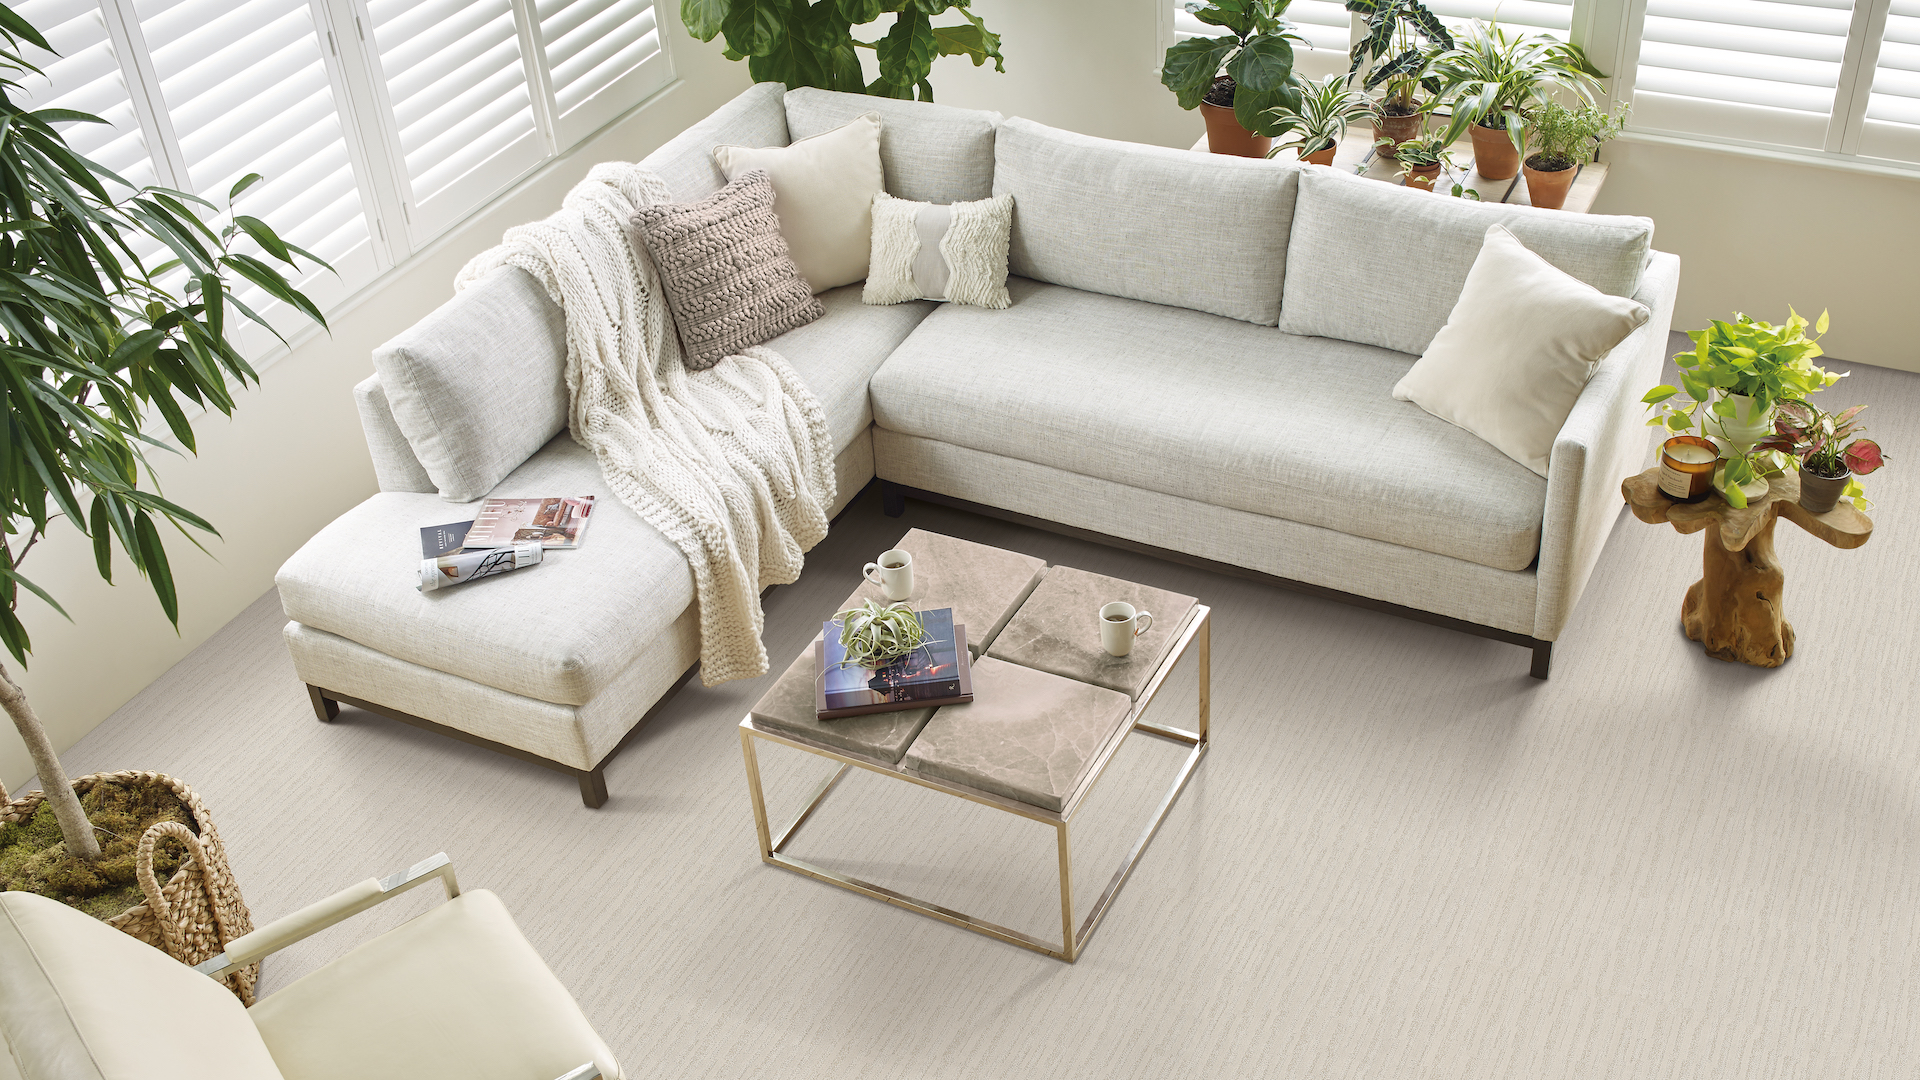 soft neutral carpets in a bright living room